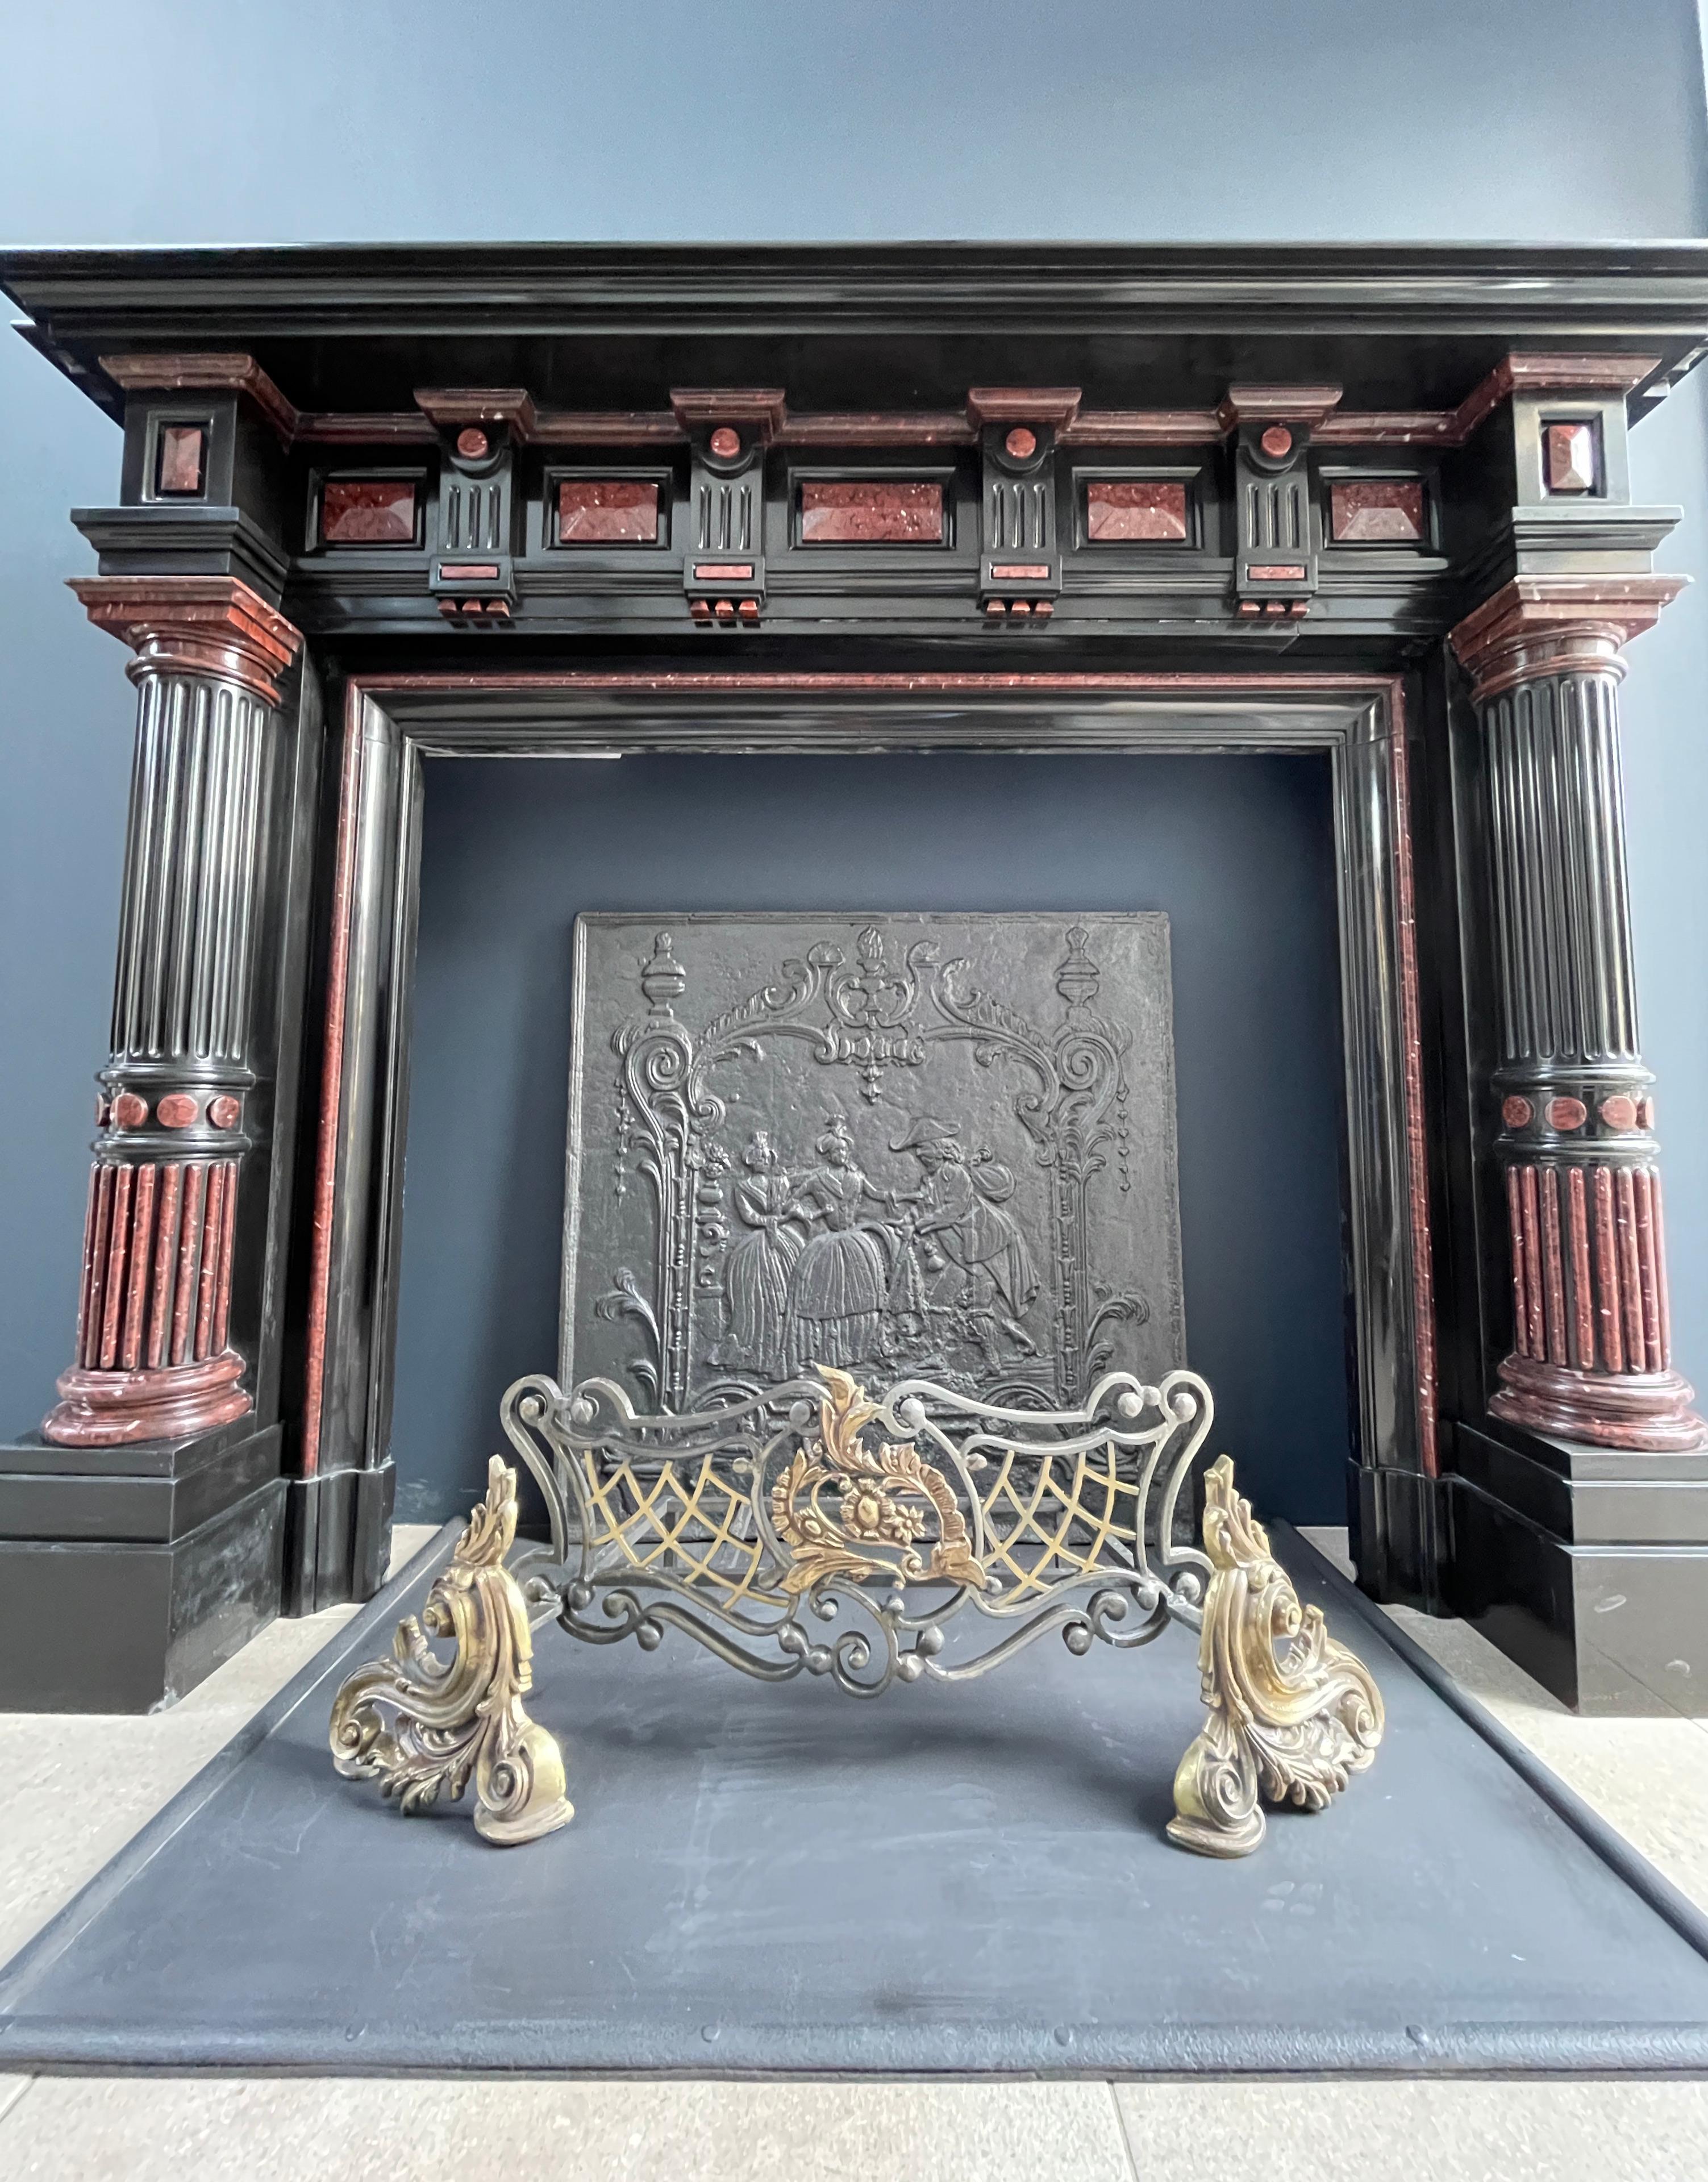 This exceptional Noir de Mazy and Marble Rouge combo Fireplace surround is not something you see every day.
Not only but especially in detail, this is a special piece. If we think of the time and energy that went into designing and especially